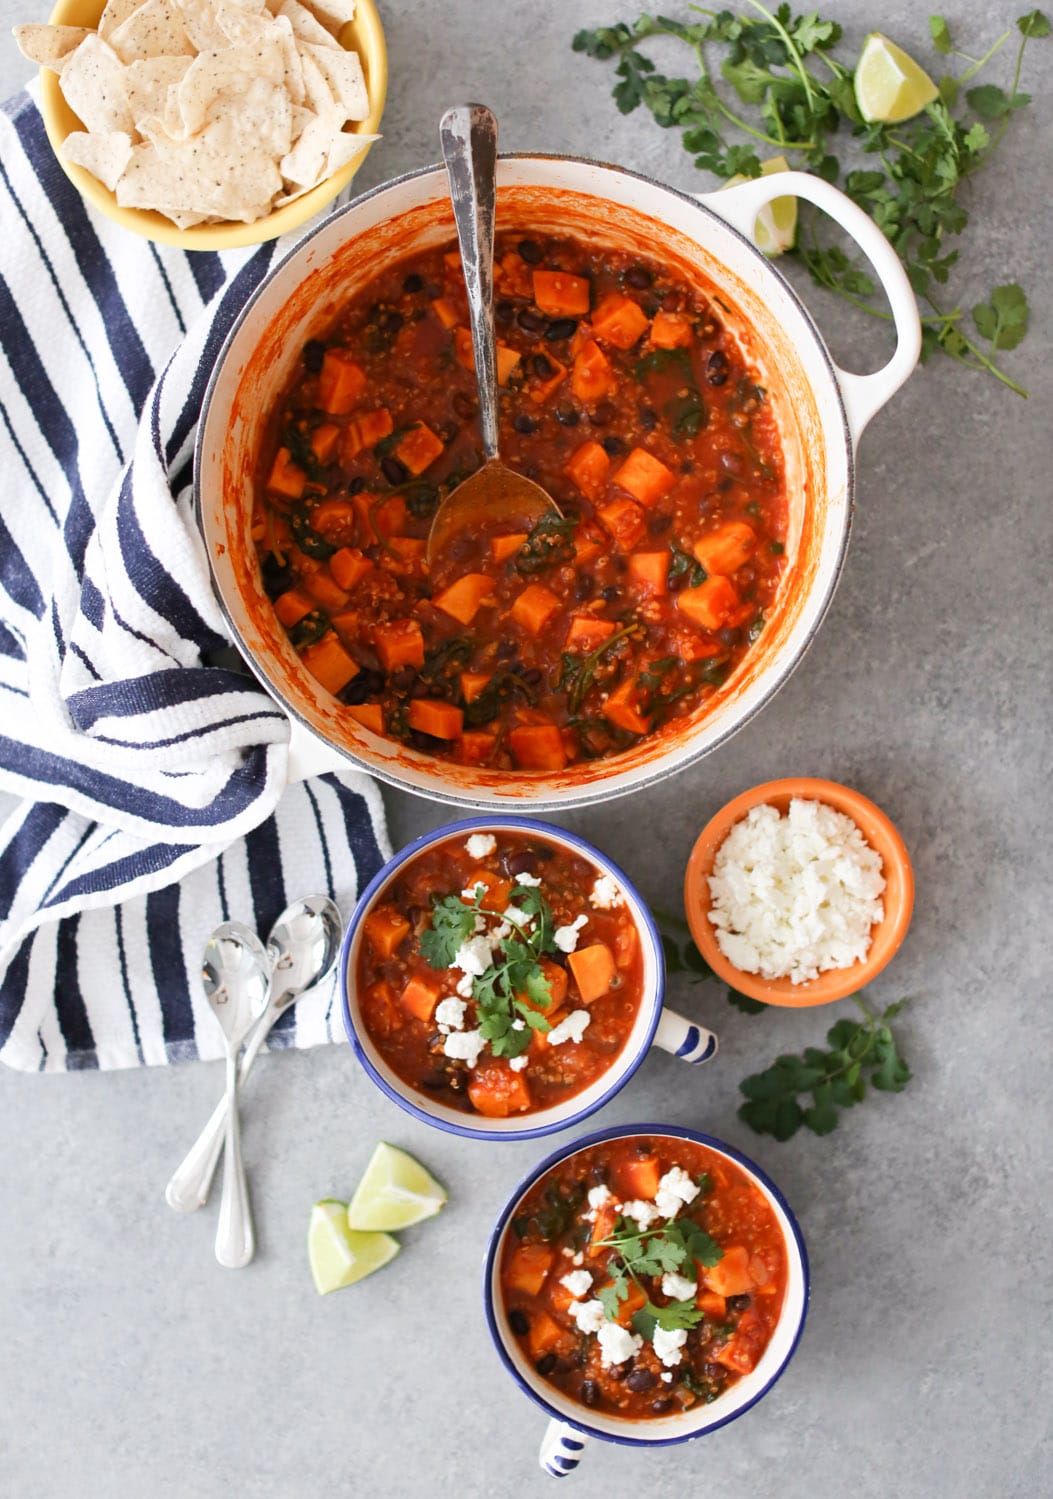 20 Satisfying Vegetarian Recipes- Mexican Sweet Potato and Black Bean Stew